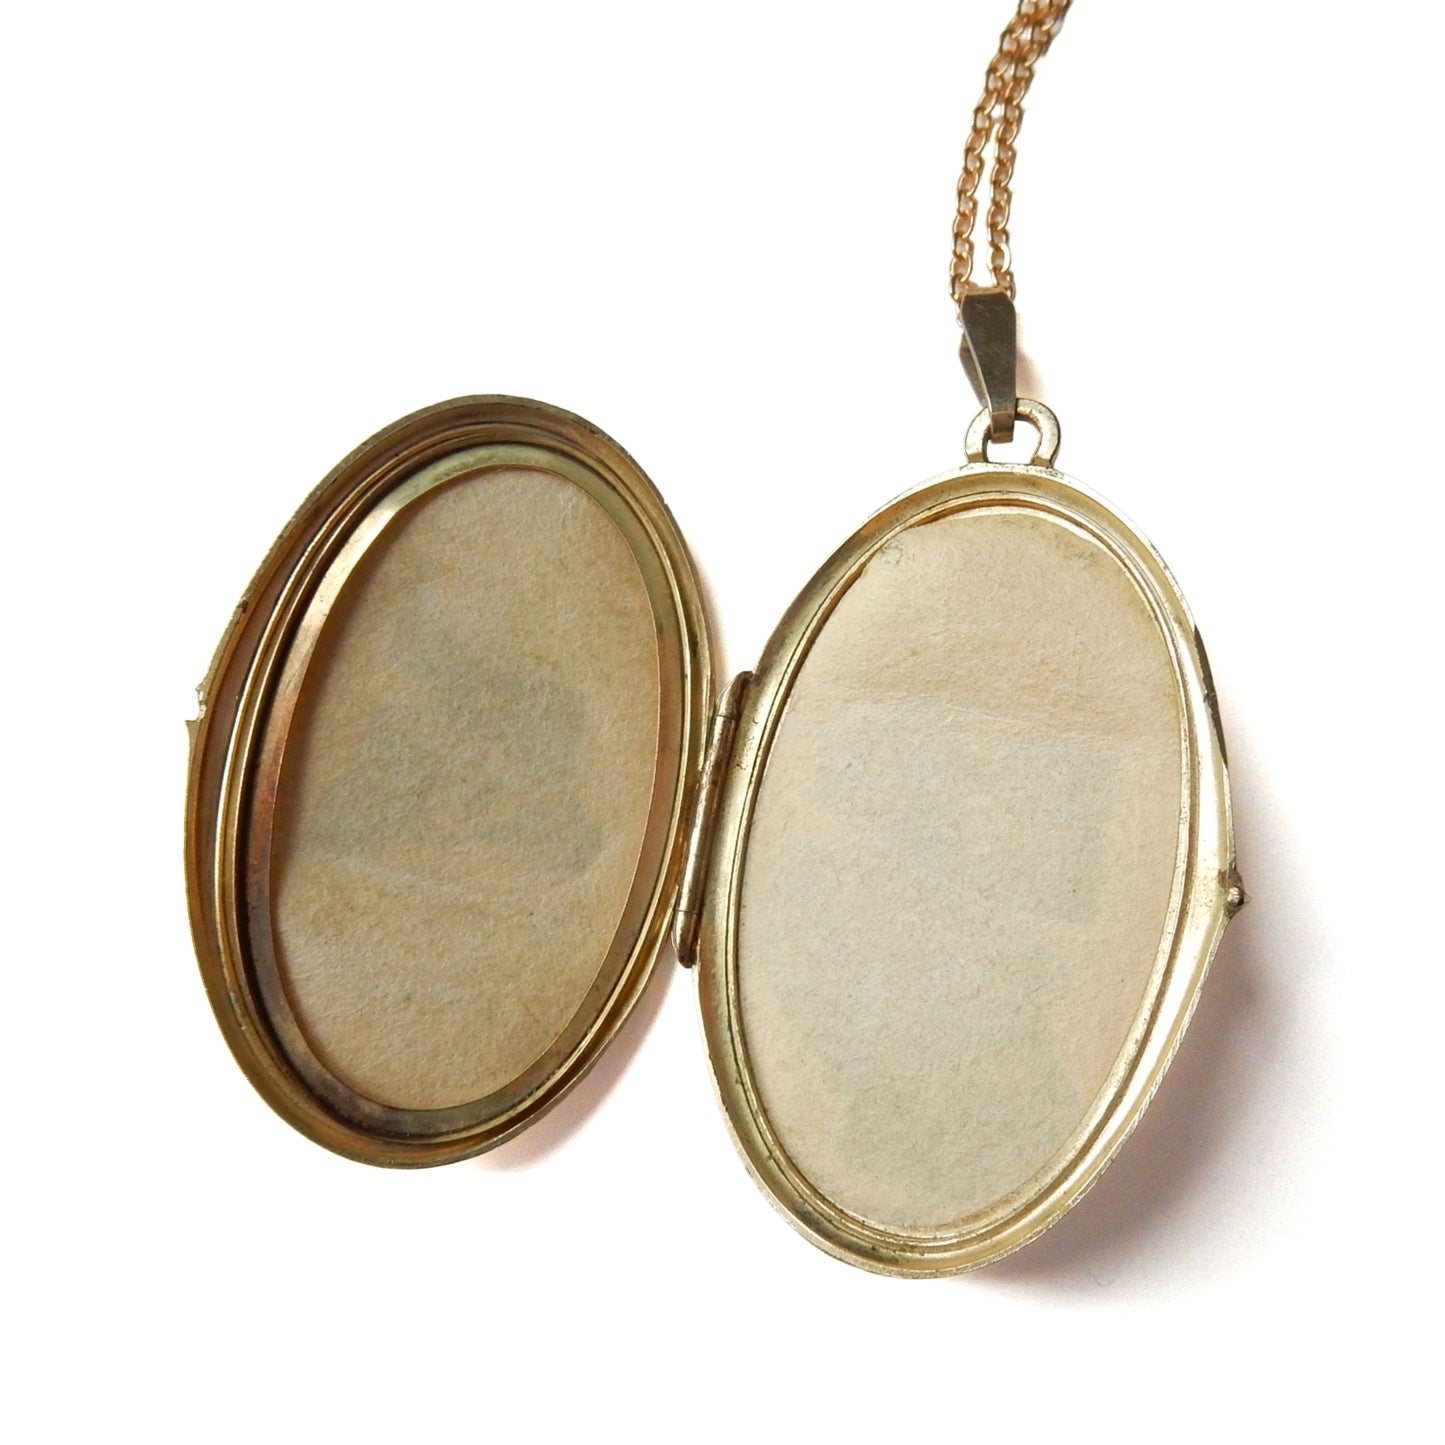 Vintage 14ct Rolled Gold Photo Locket with Chain